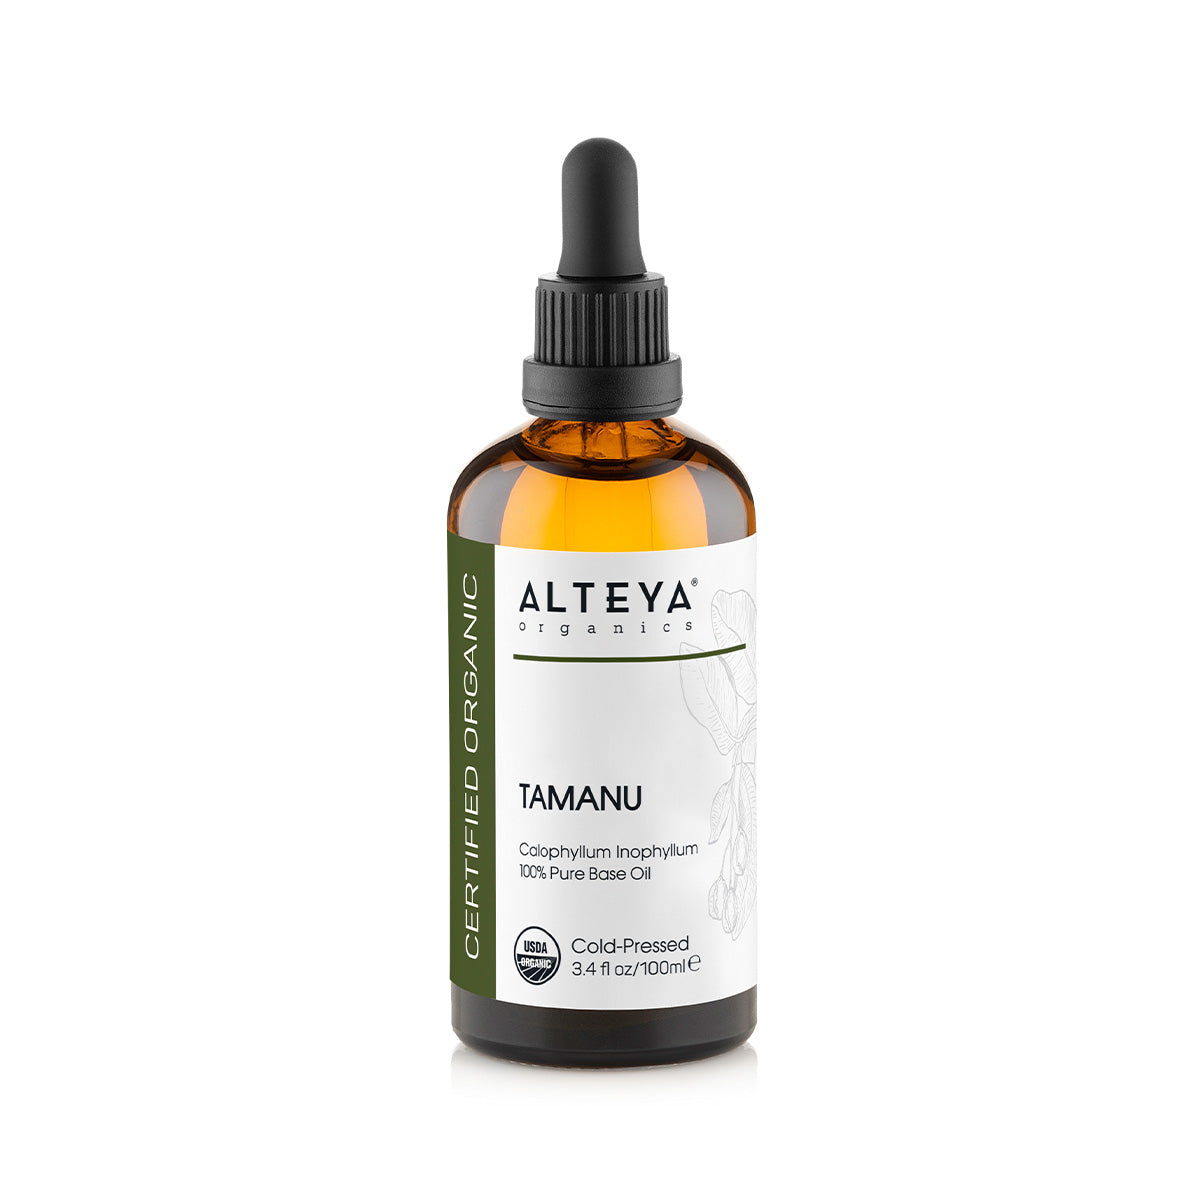 An Alteya Organics Organic Tamanu Carrier Oil bottle with skin clarity benefits, displayed on a white background.